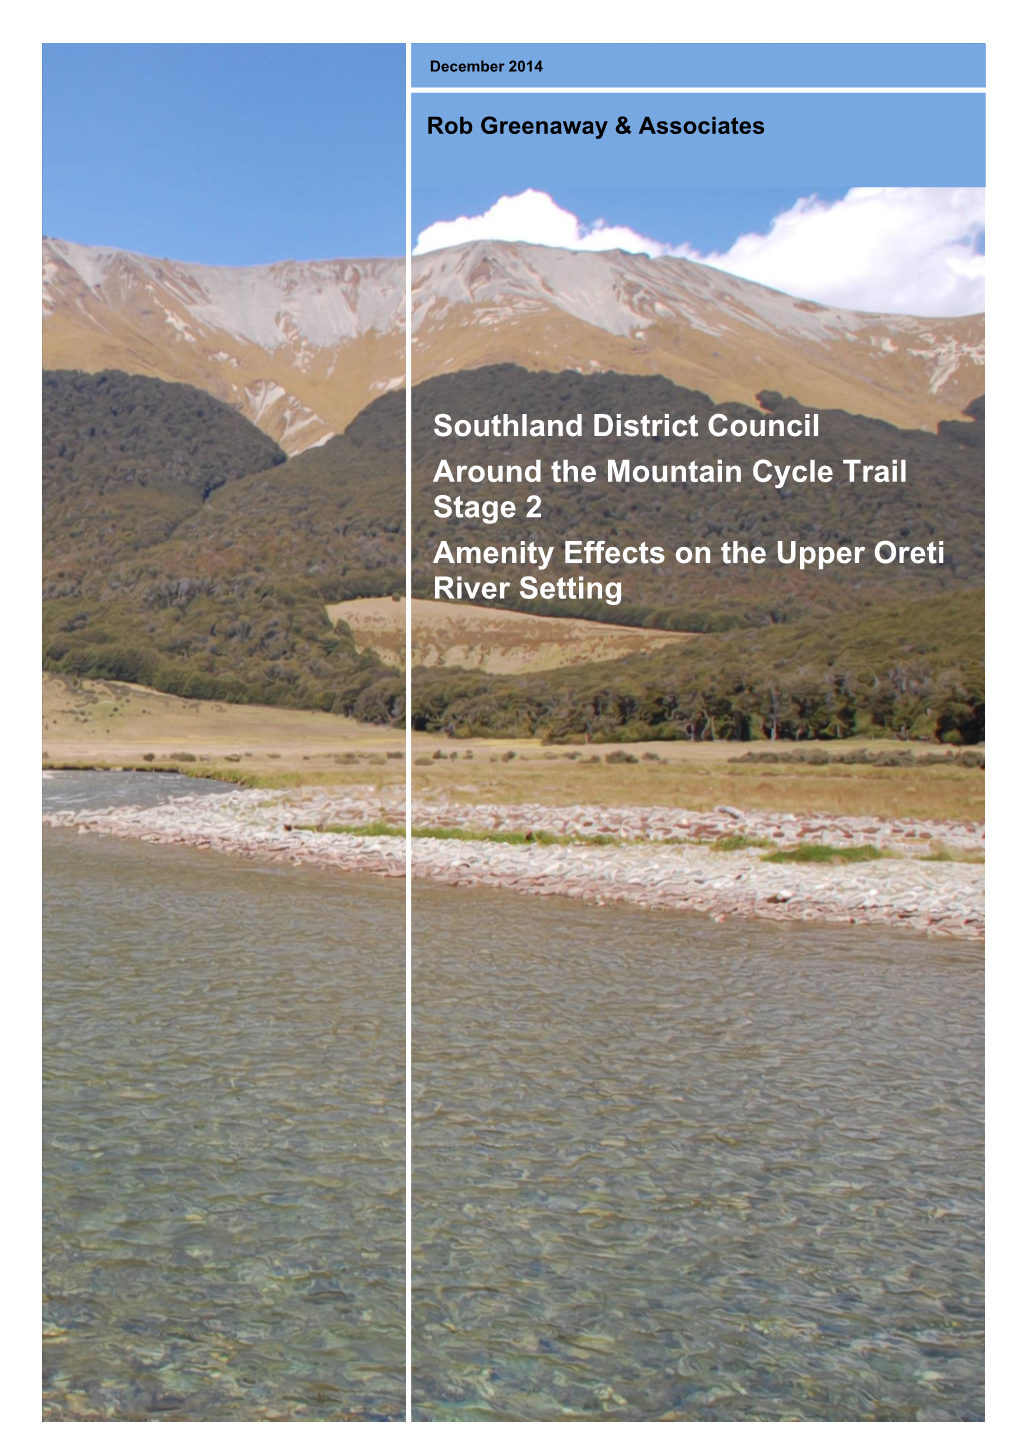 Southland District Council Around the Mountain Cycle Trail Stage 2 Amenity Effects on the Upper Oreti River Setting